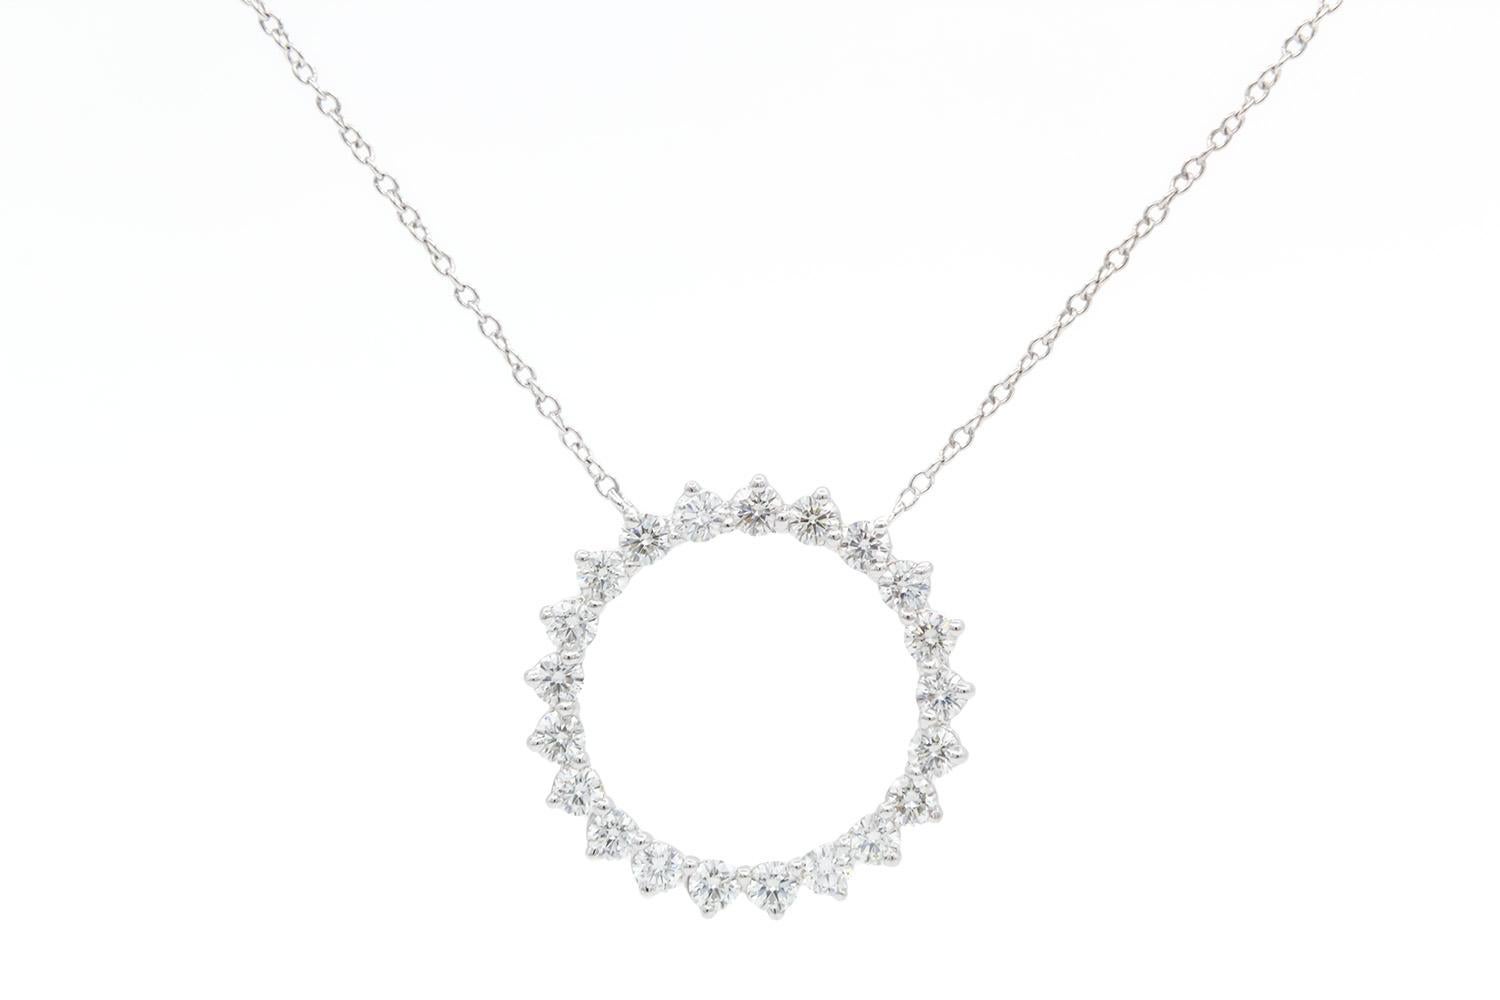 We are pleased to offer this Authentic Tiffany & Co. Open Circle Platinum & Diamond Medium Pendant Necklace. This gorgeous diamond pendant necklace features the classic Tiffany Open Circle design. The necklace measures 16.75